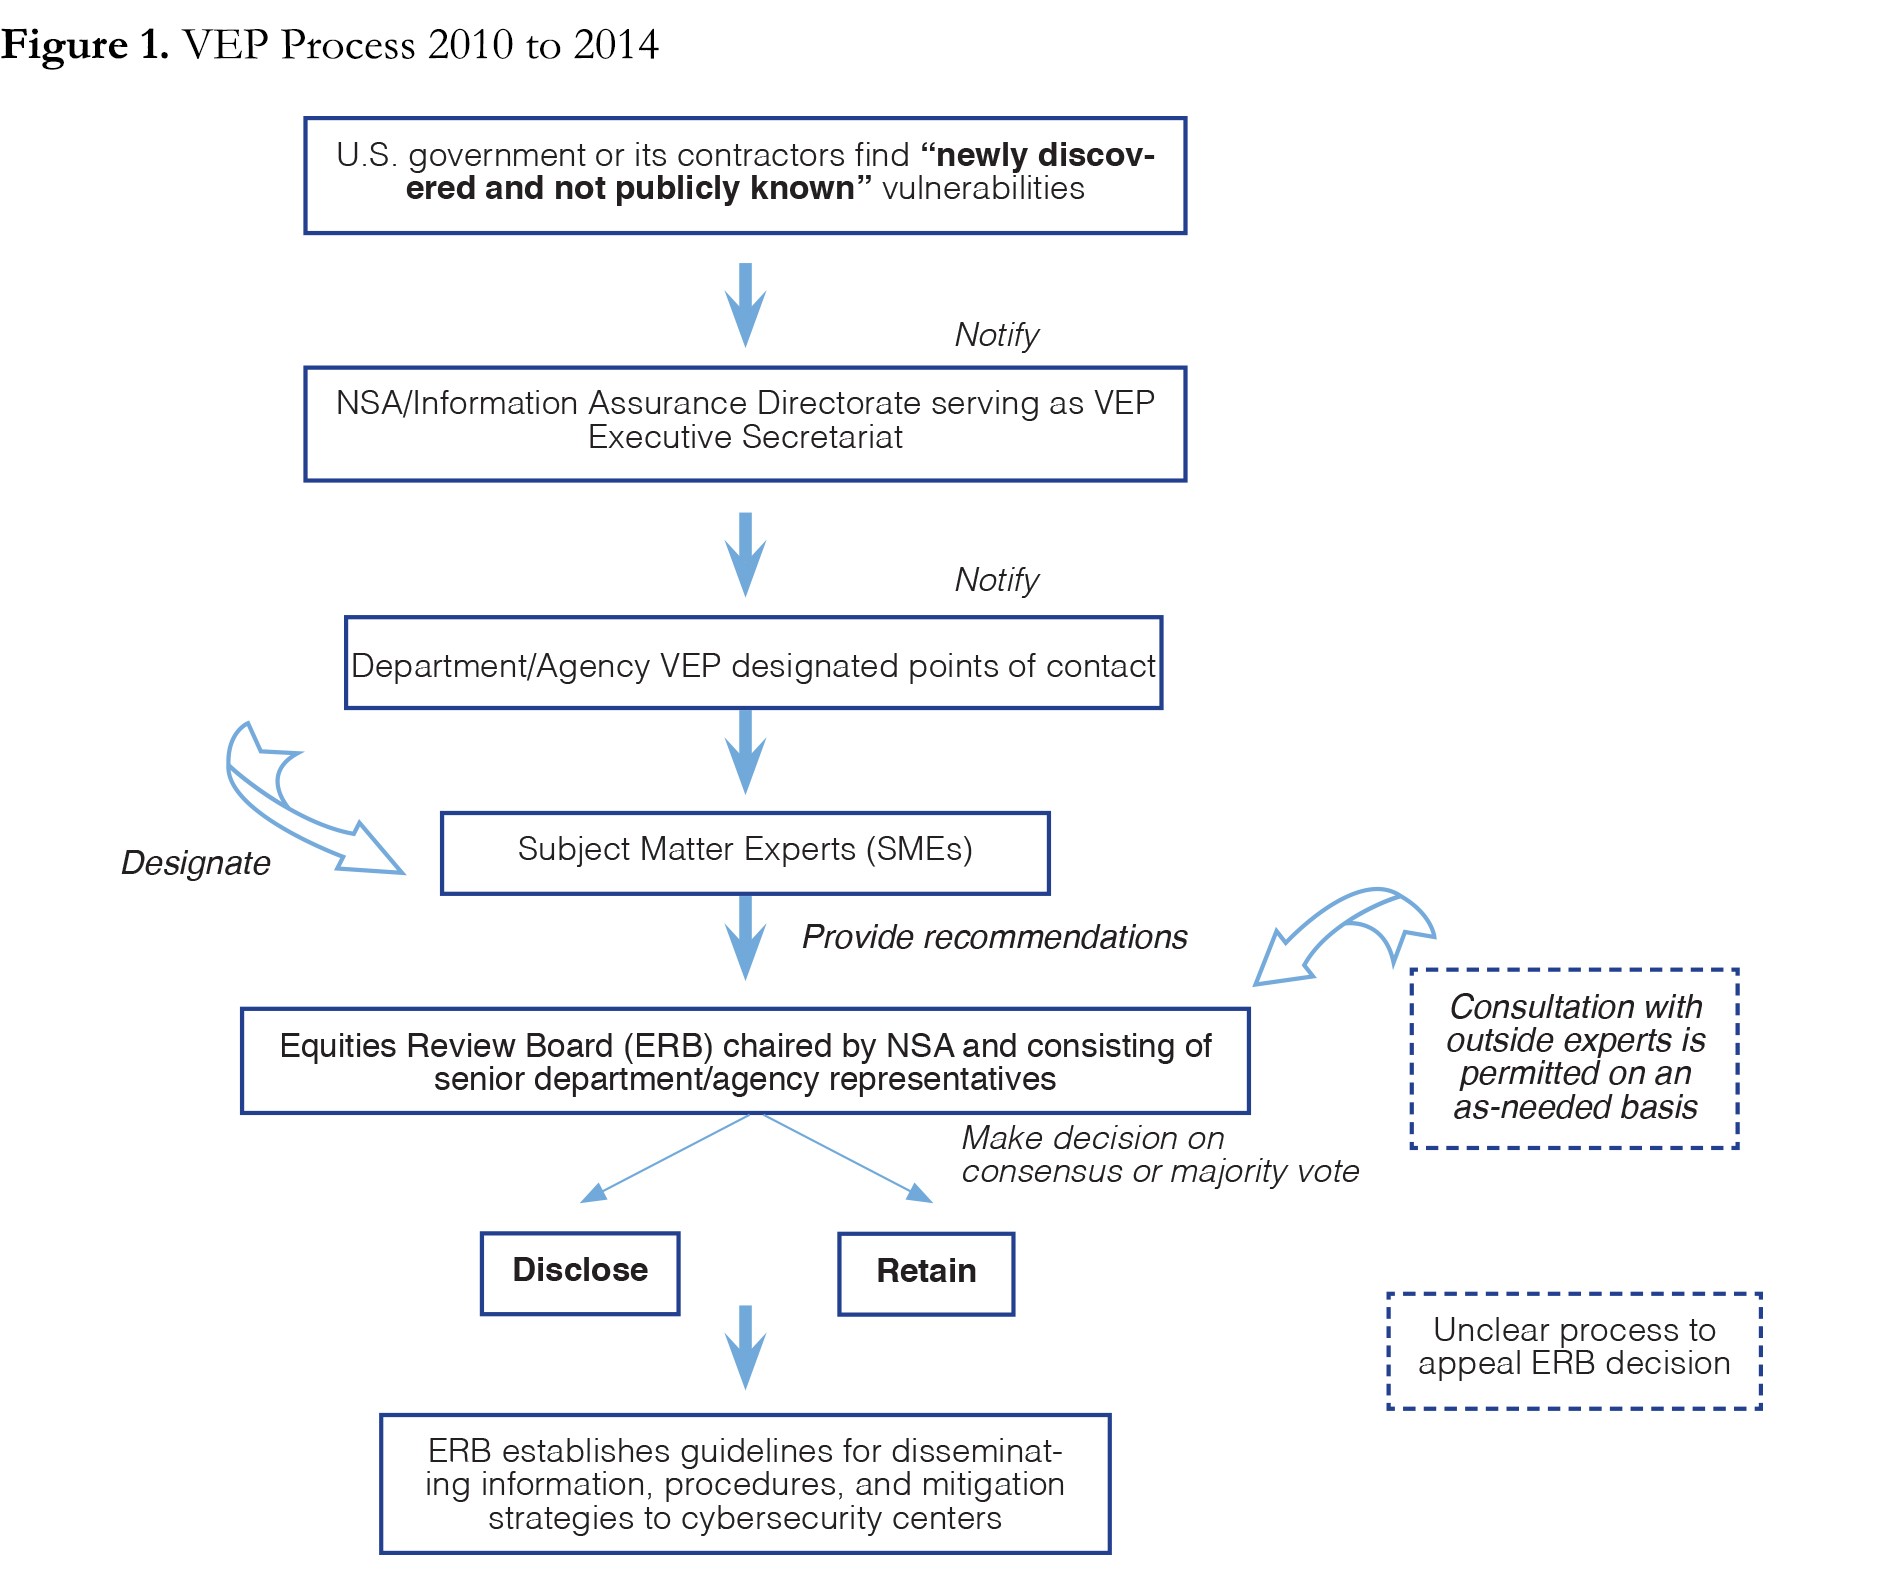 VEP Process 2010 to 2014